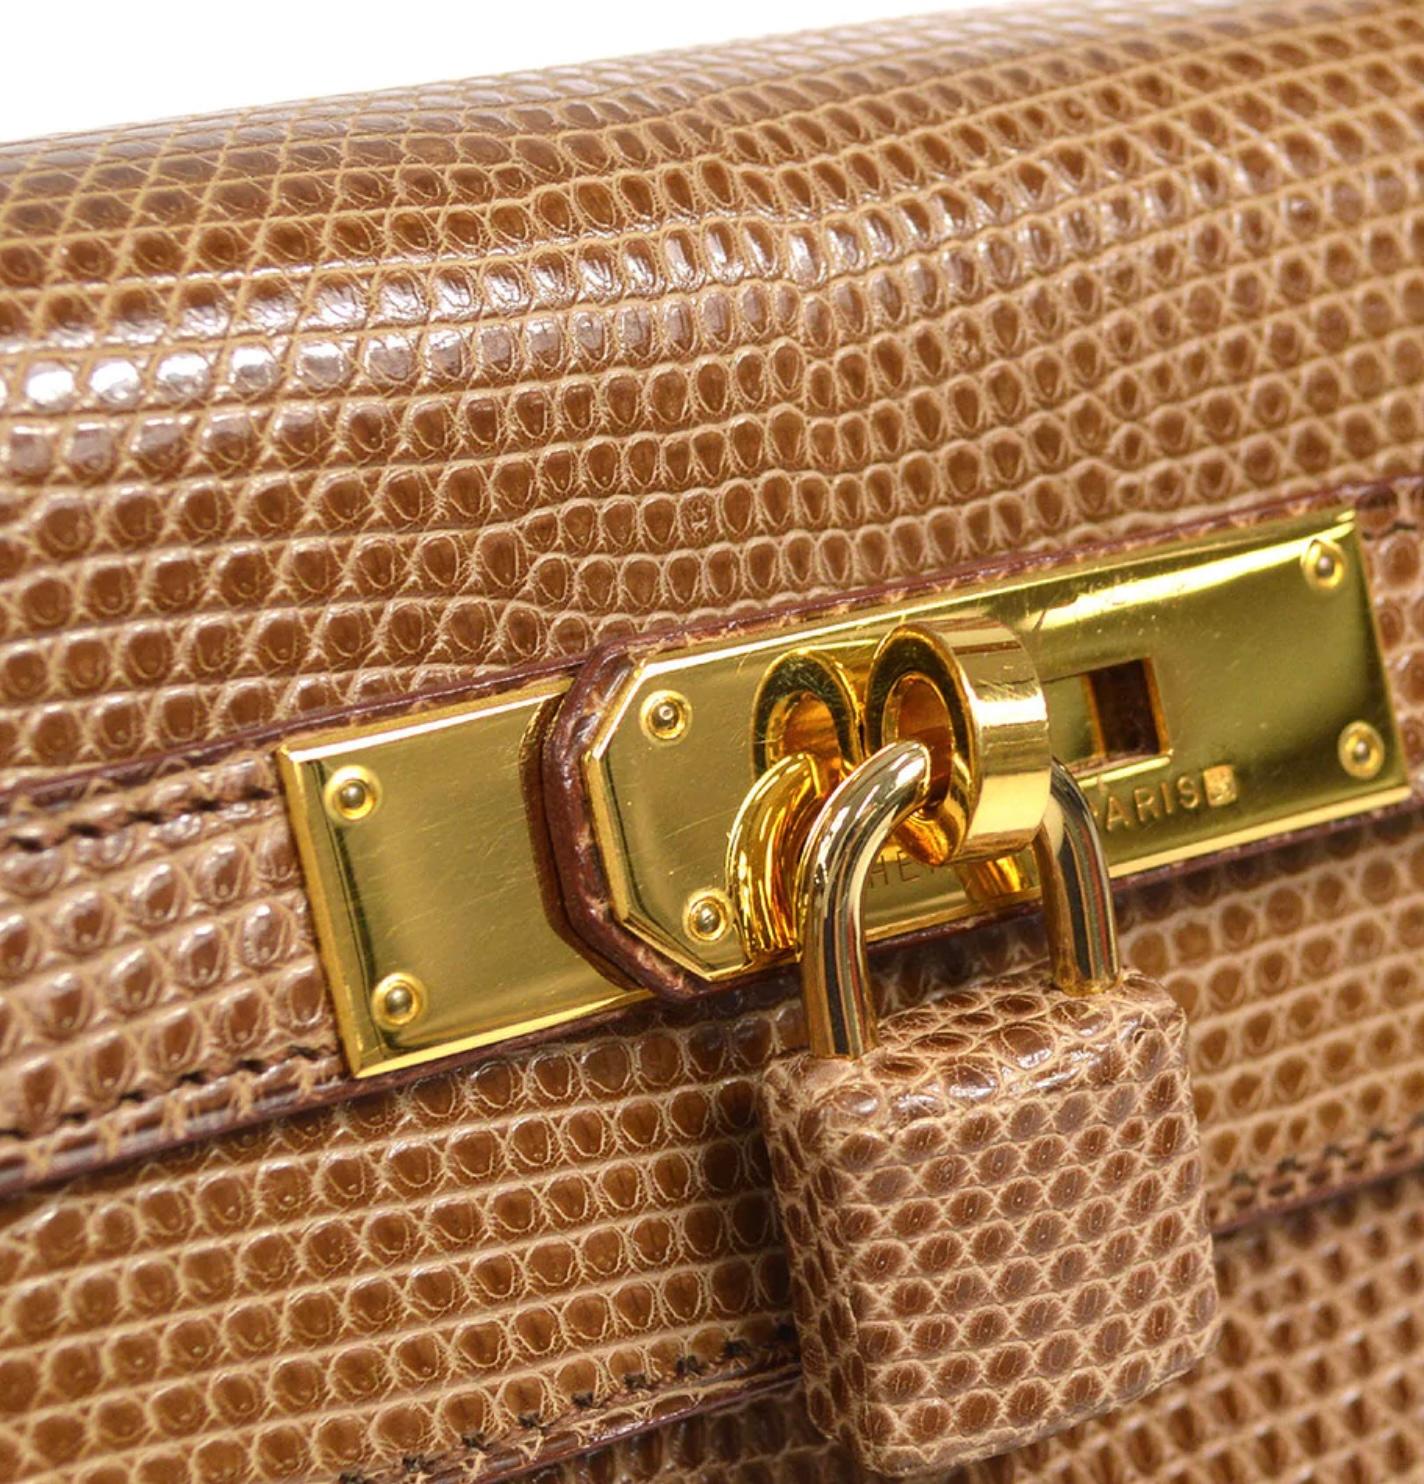 Pre-Owned Vintage Condition
From 1995 Collection
Lizard Leather
Gold Hardware
Includes Clochette, Padlock, Keys, Dust Bag
W 11.5